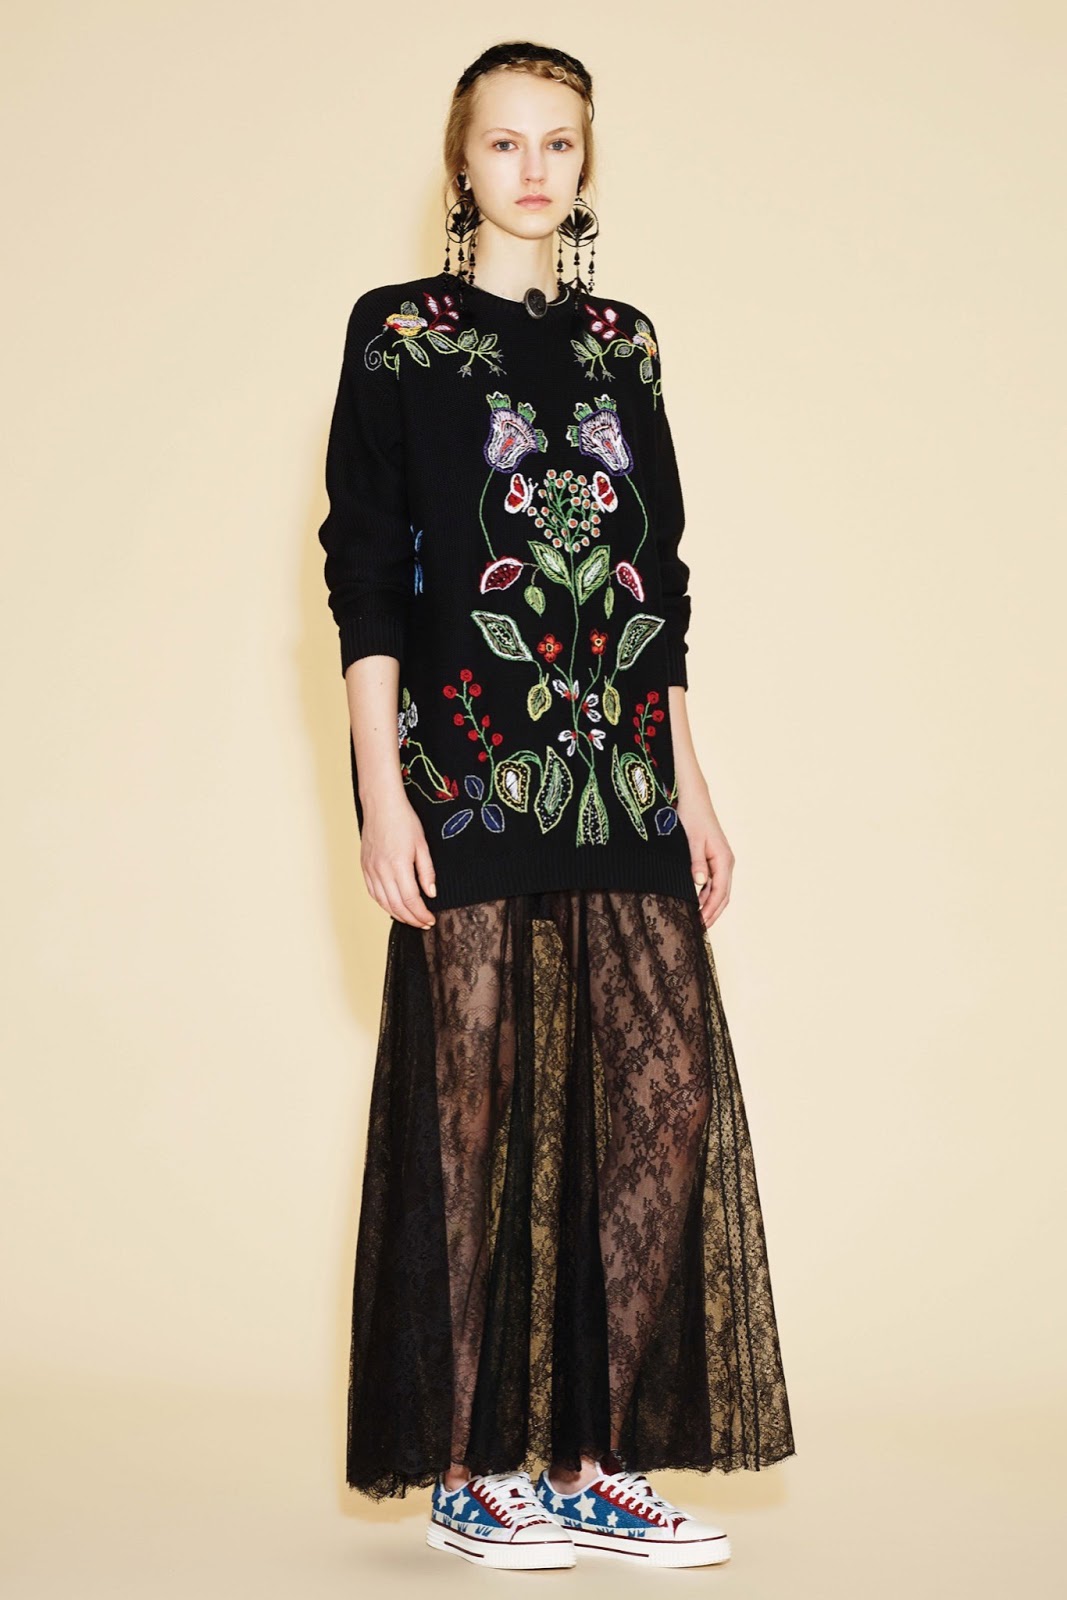 Valentino Resort Collection July 3, 2015 | ZsaZsa Bellagio - Like No Other